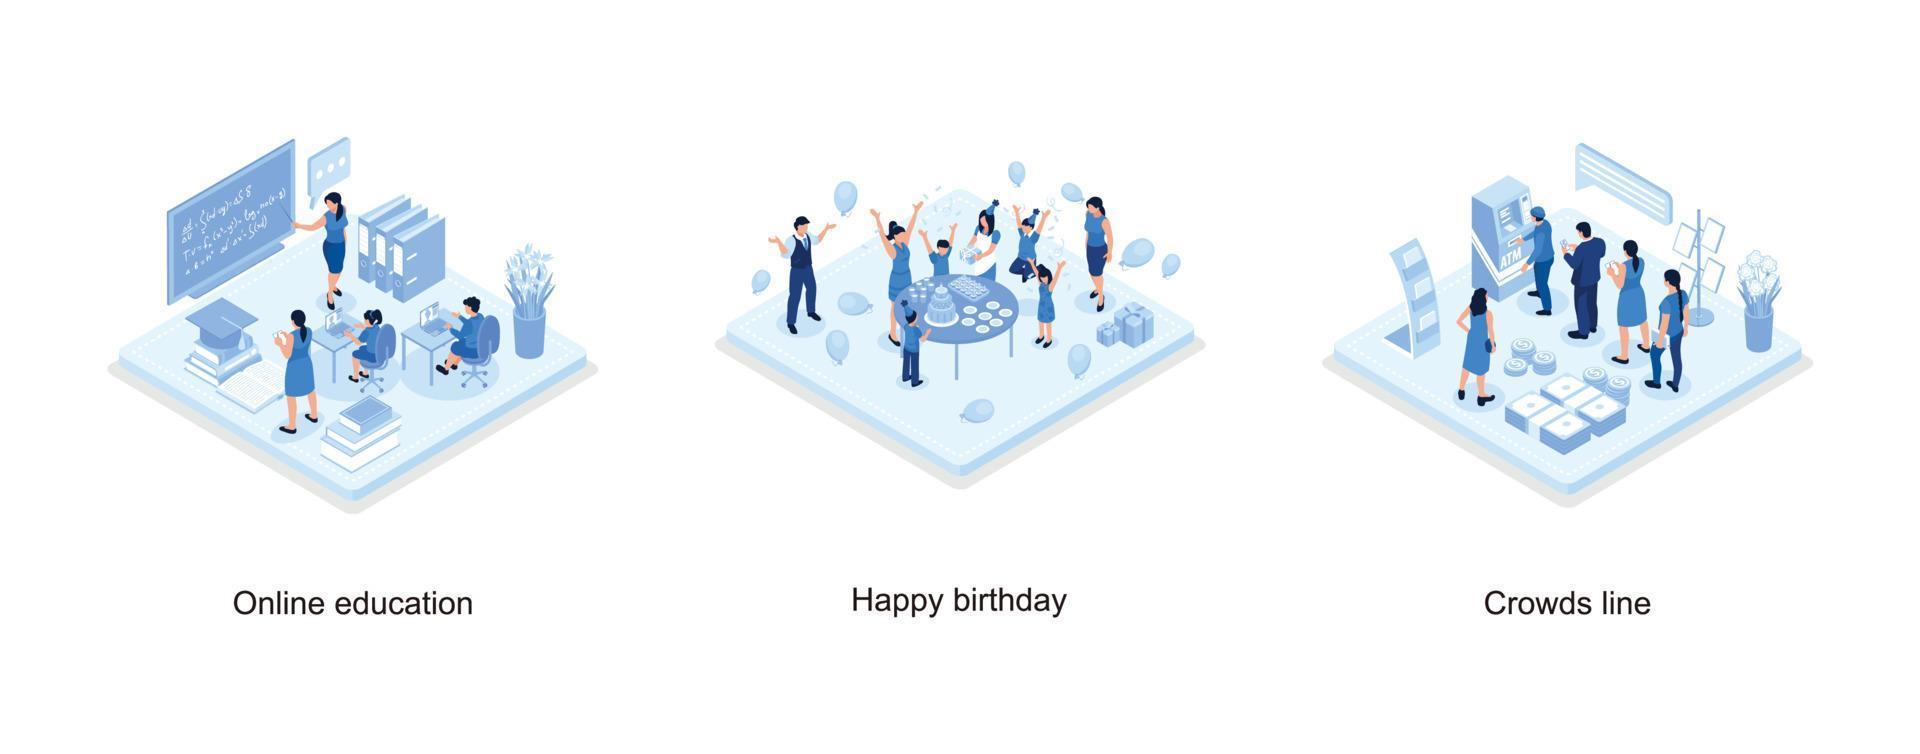 Student Learning Online at Home, People Characters standing near Birthday Cake and Celebrating, People waiting in line near atm machine, set isometric vector illustration